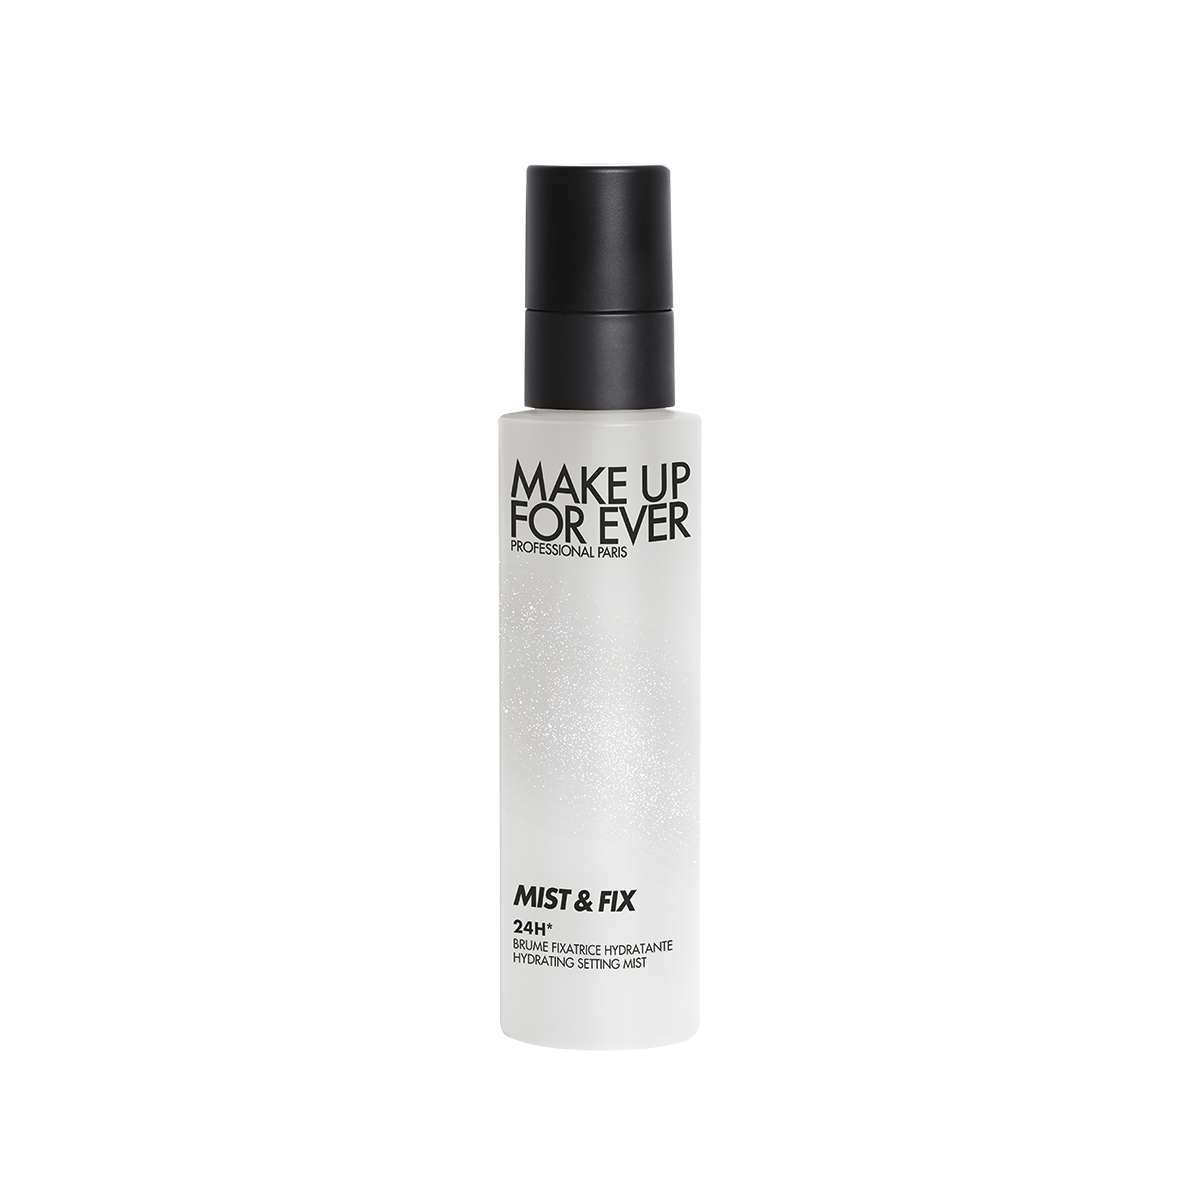 Make Up For Ever Mist & Fix 24hr Hydrating Setting Spray 3.38 oz / 100 ml